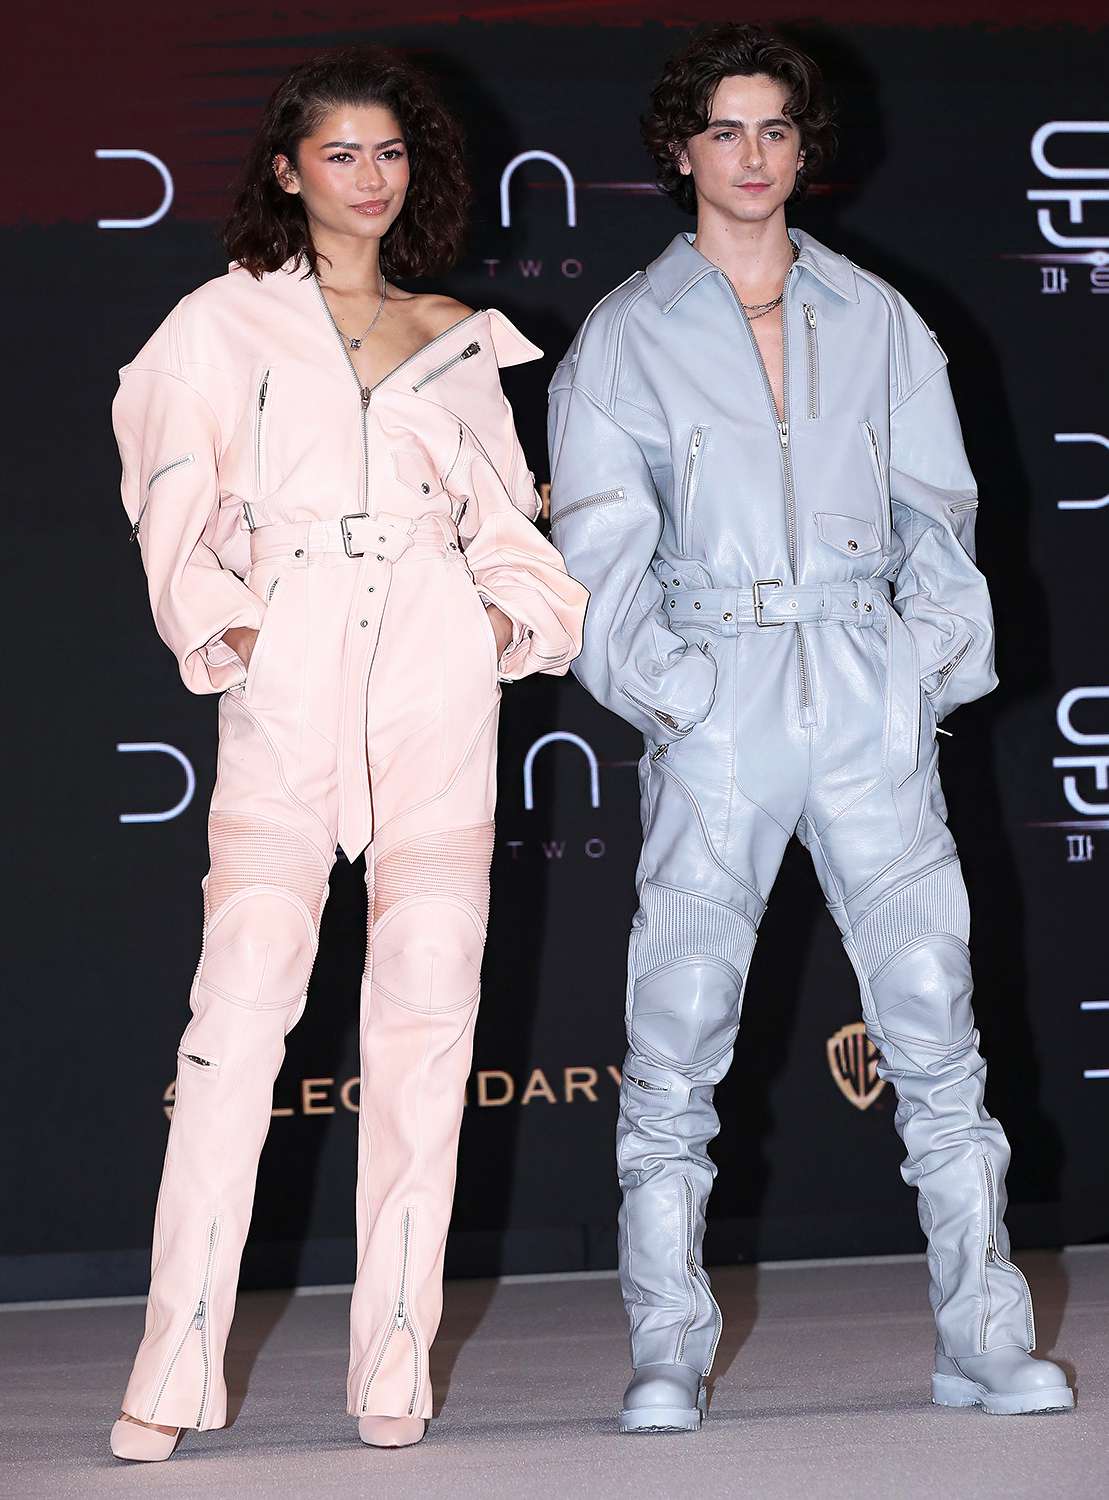 Zendaya and Timothee Chalamet attend the "Dune: Part Two" press conference on February 21, 2024 in Seoul, South Korea.